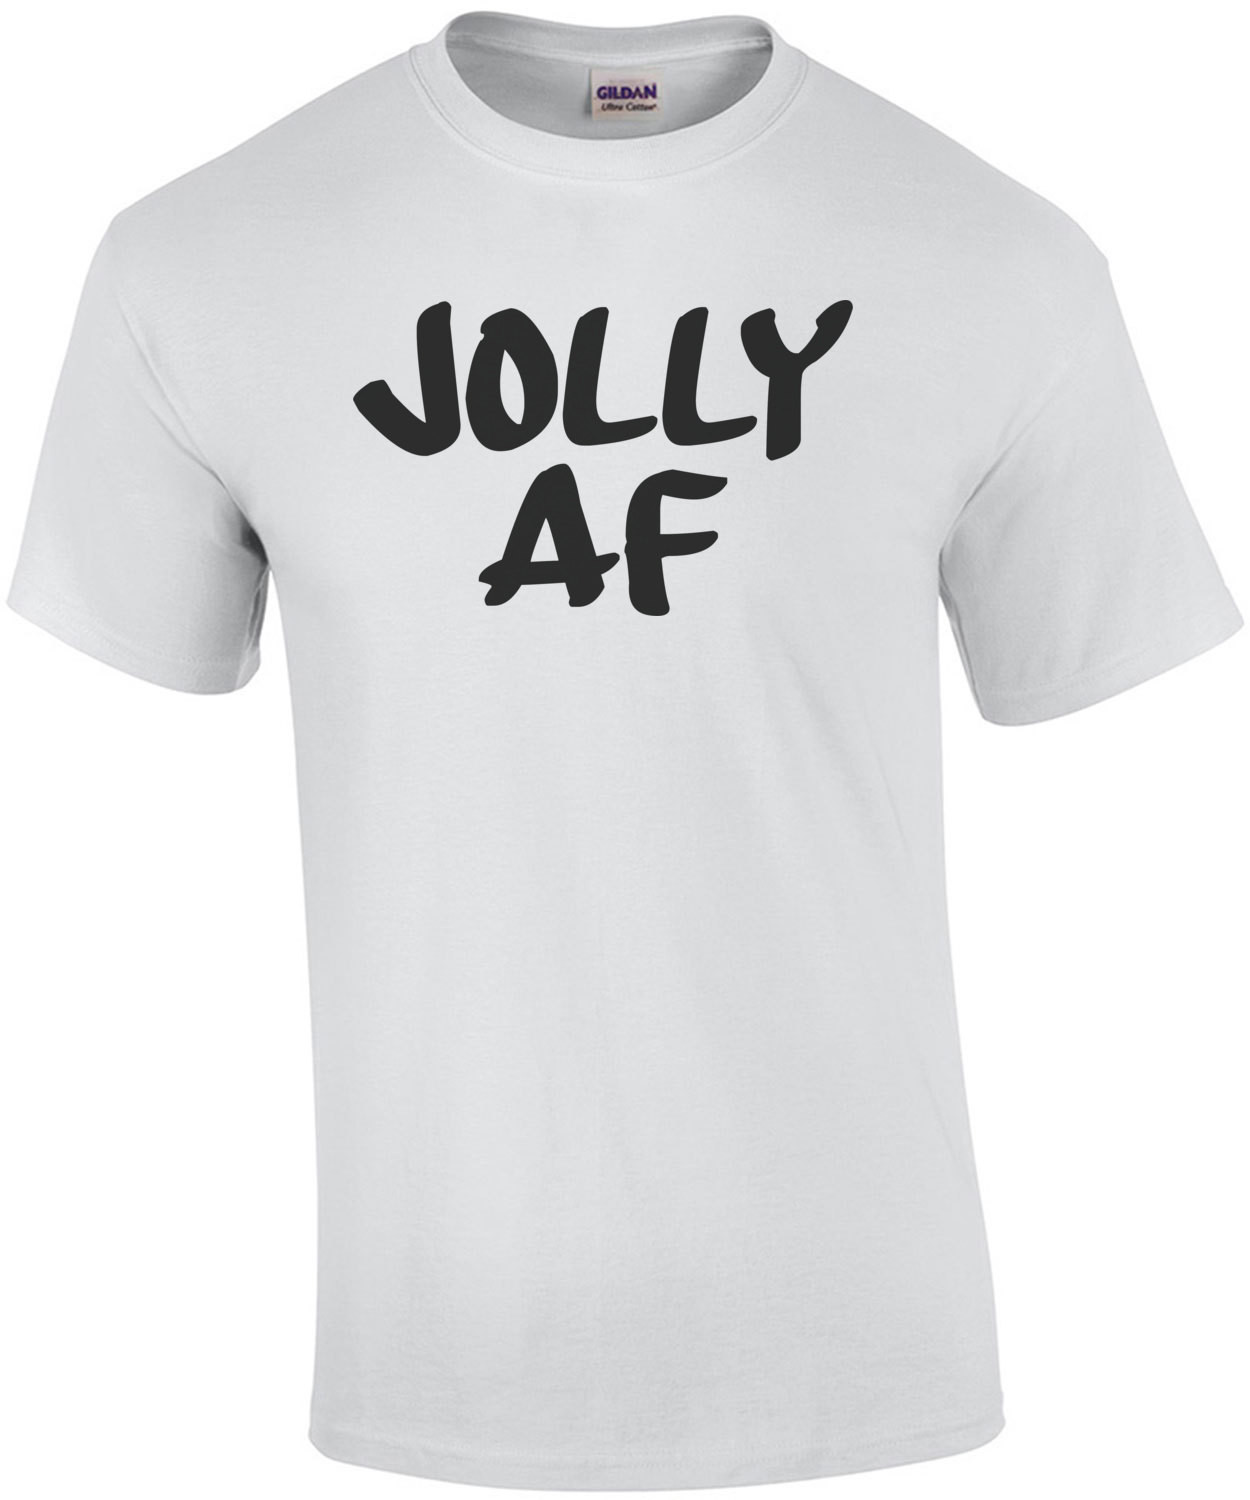 JOLLY AF - JOLLY AS FUCK - Funny Christmas T-Shirt